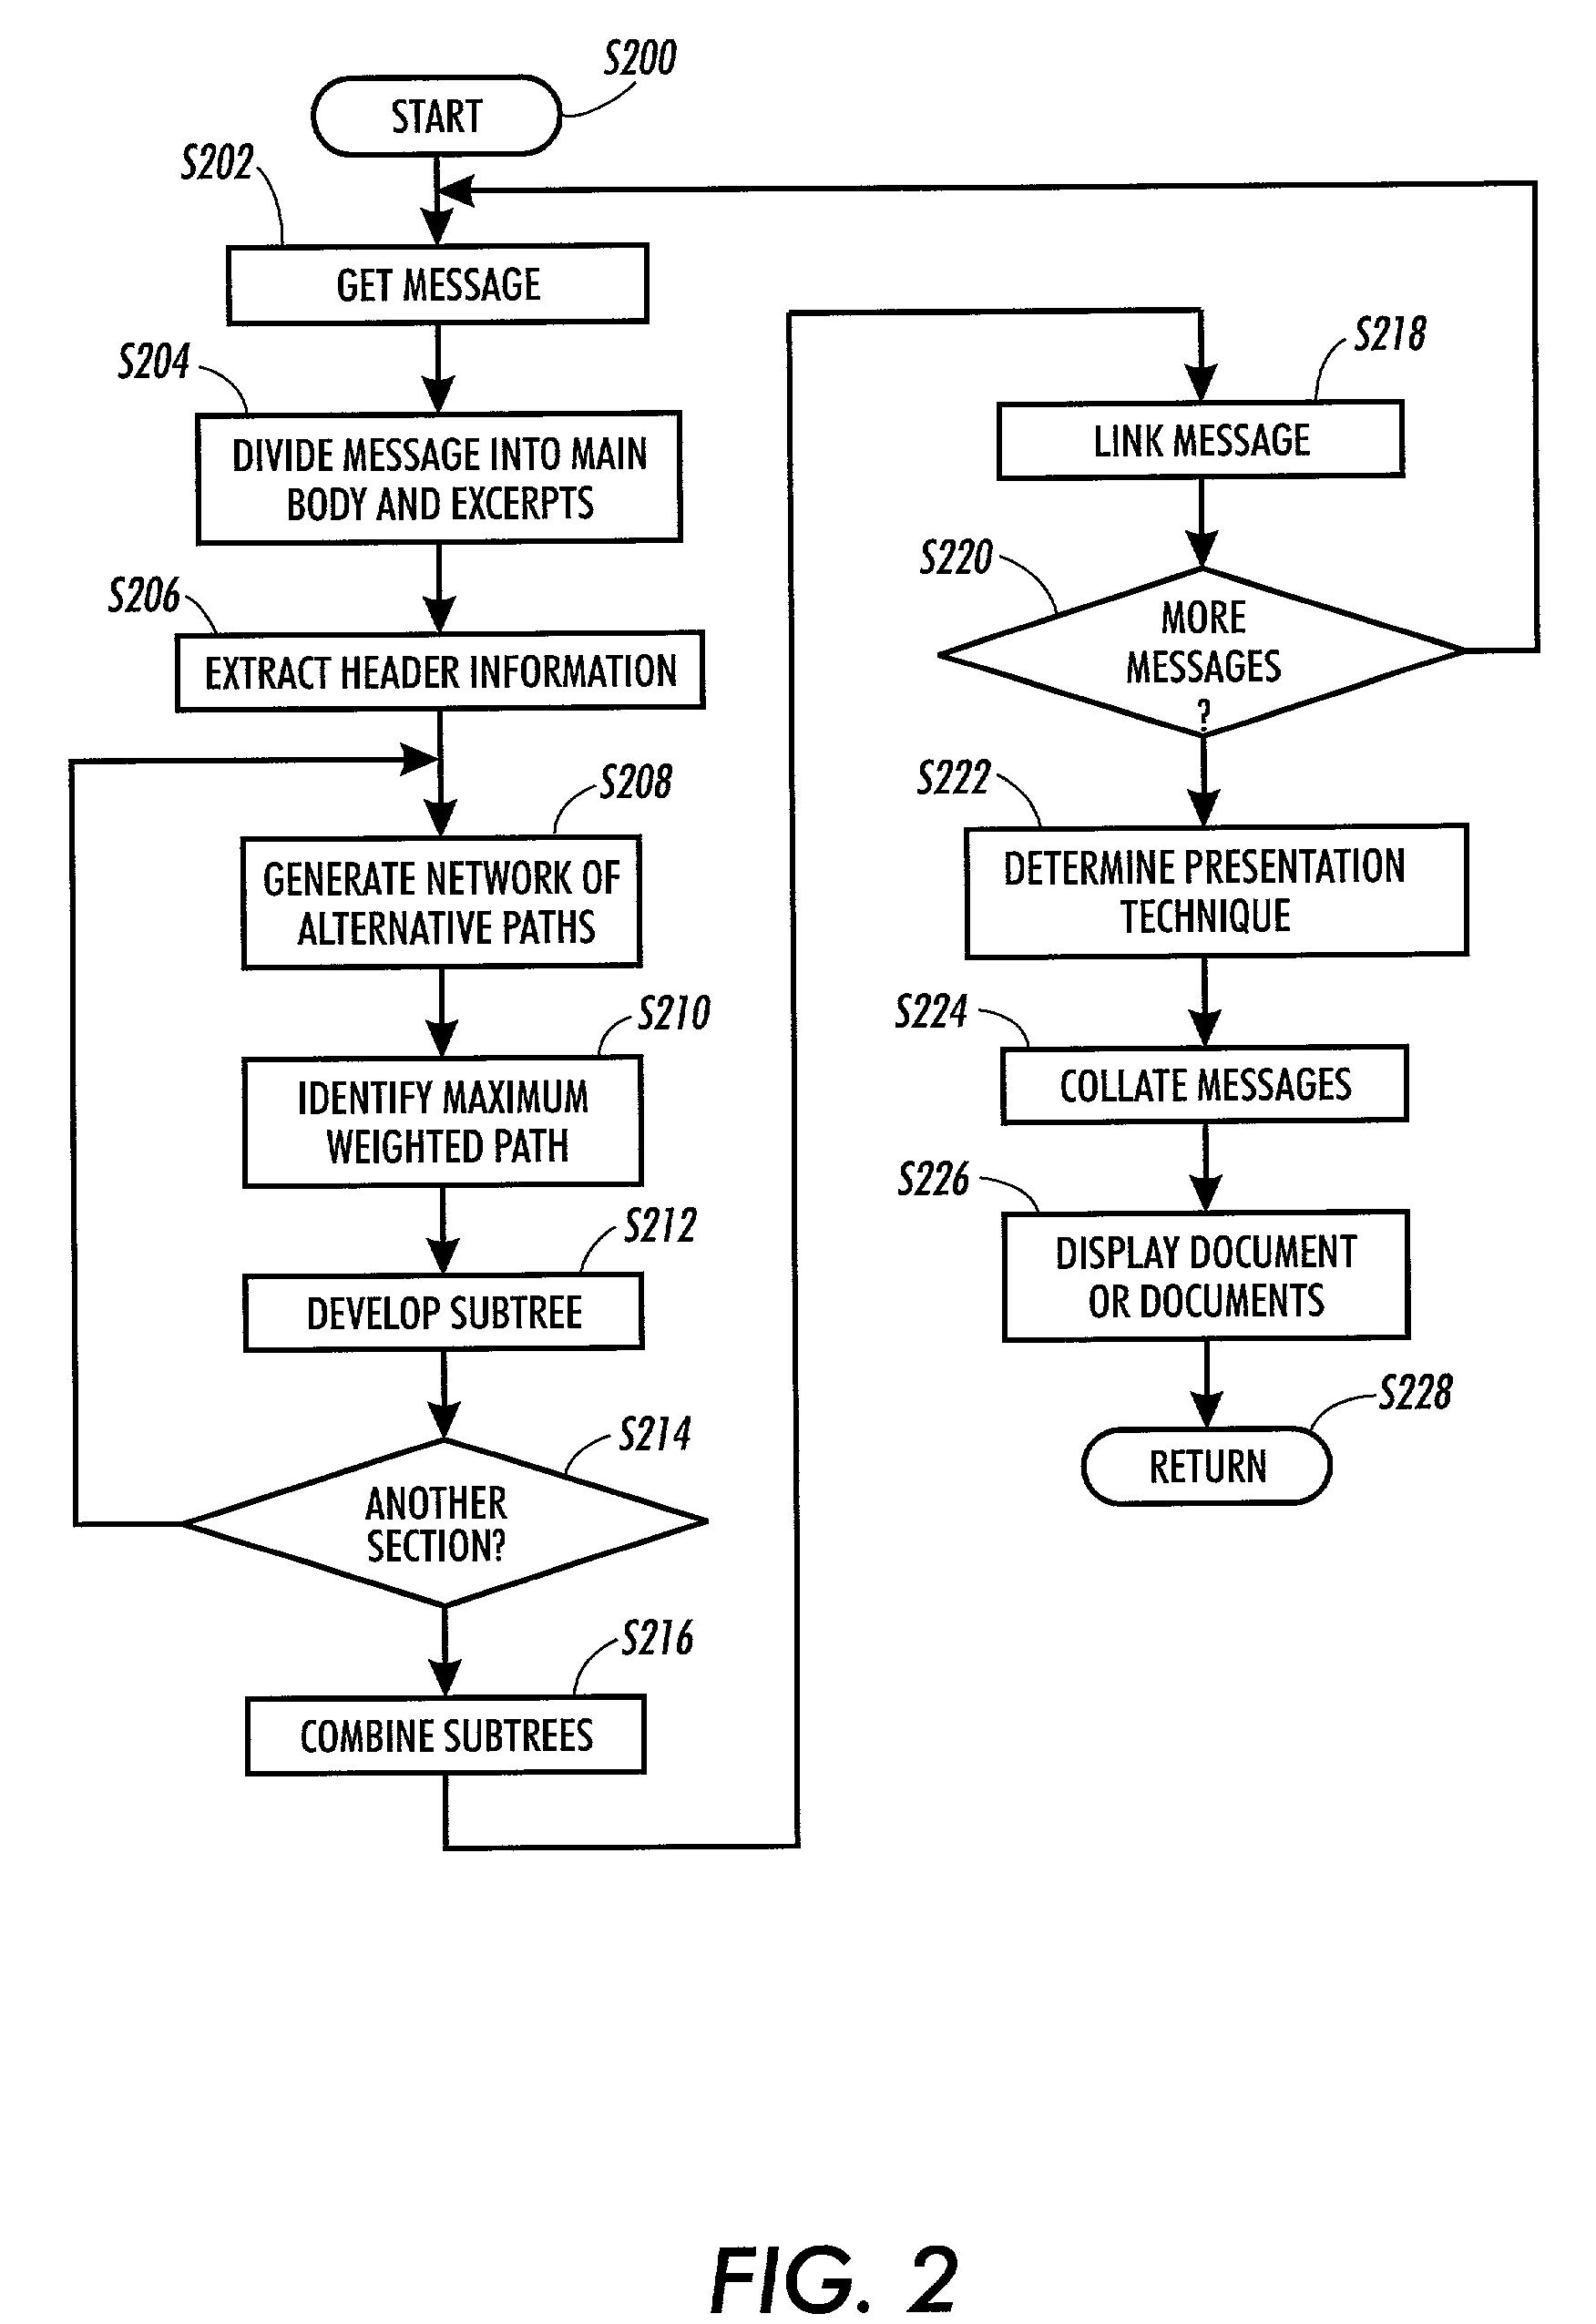 Method and apparatus for presenting e-mail threads as semi-connected text by removing redundant material